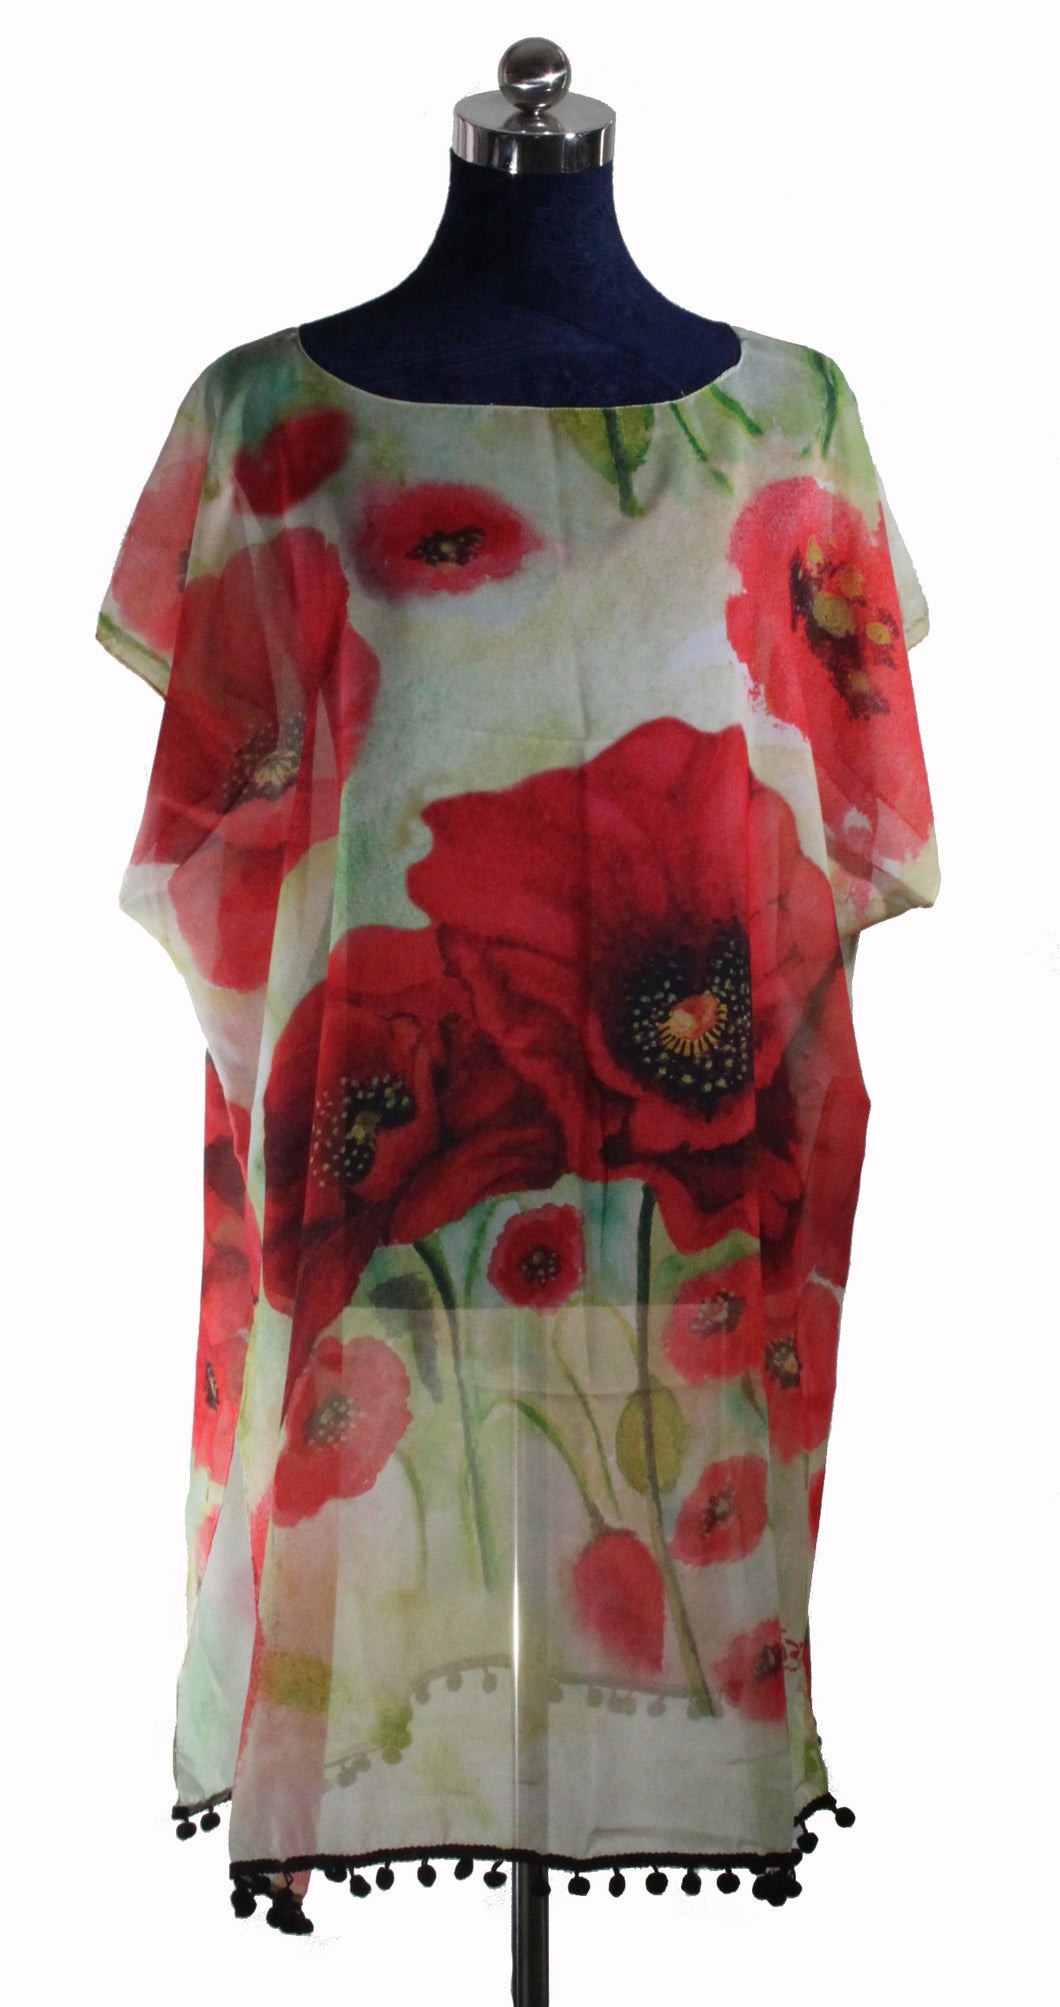 KAFTAN FOR WOMEN WITH POPPIES IN SILK CHIFFON WITH ARTISTIC PRINTS THAT COME FROM PAINTINGS.